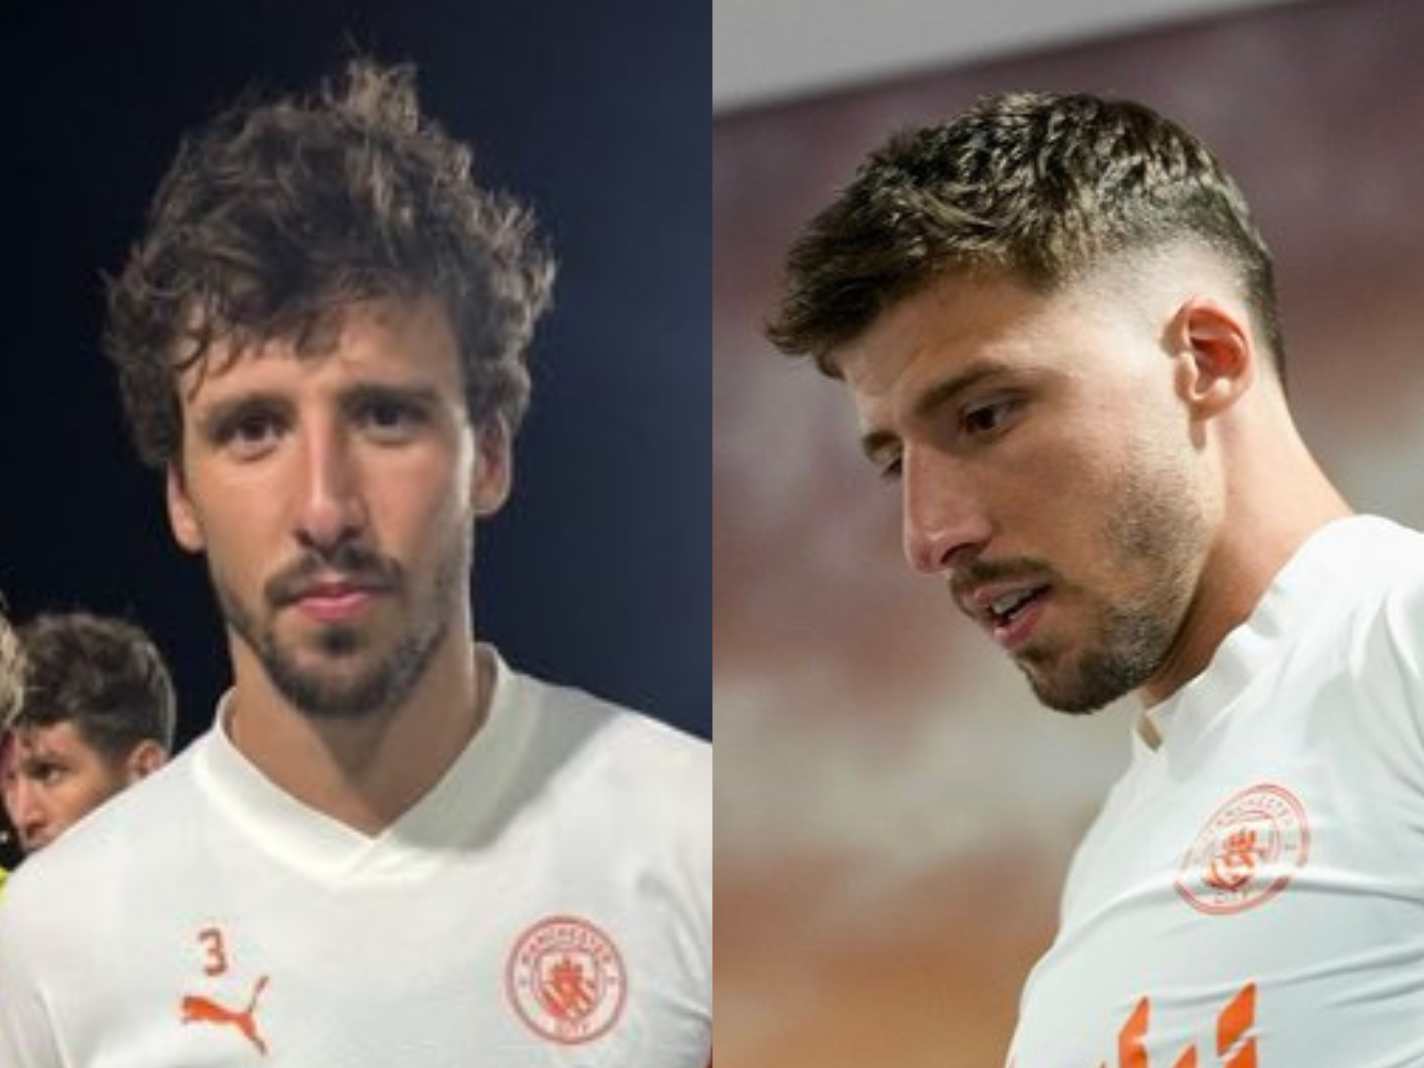 Ruben Dias Drops Fluffy Look for Skin Fade Haircut and Erling Haaland Can’t Get Enough of It